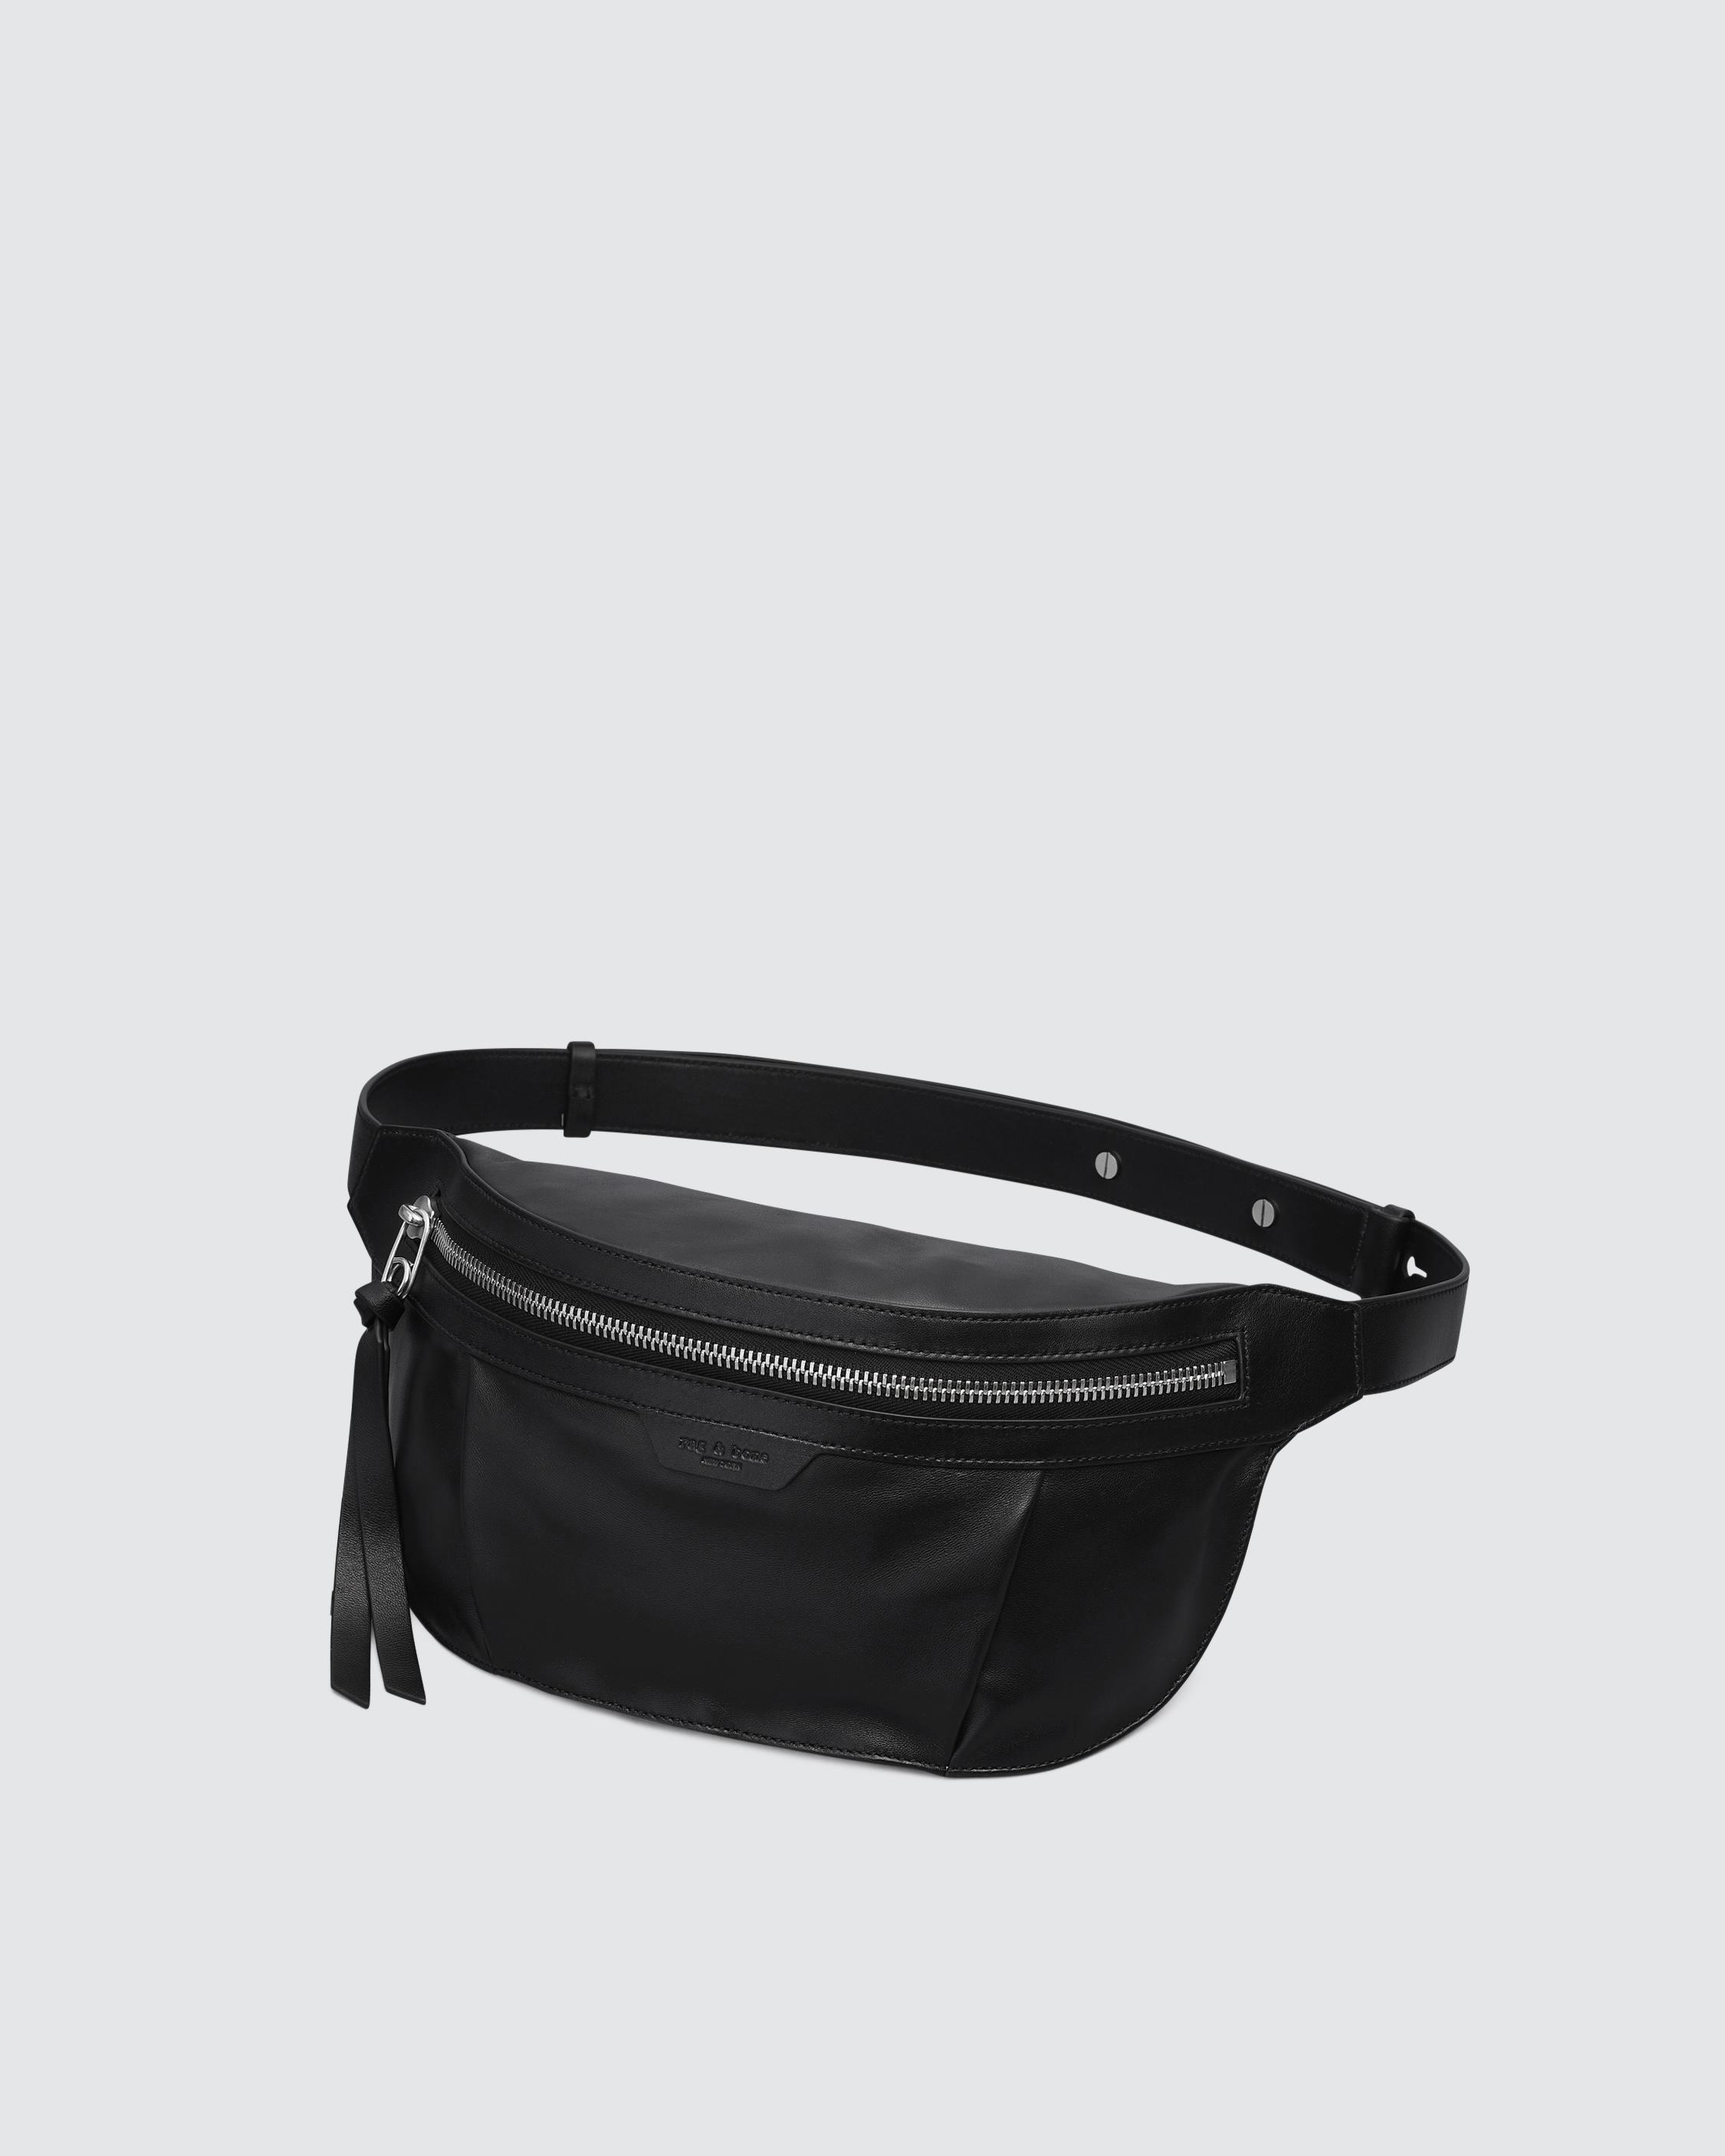 Commuter Fanny Pack - Leather
Small Fanny Pack - 1